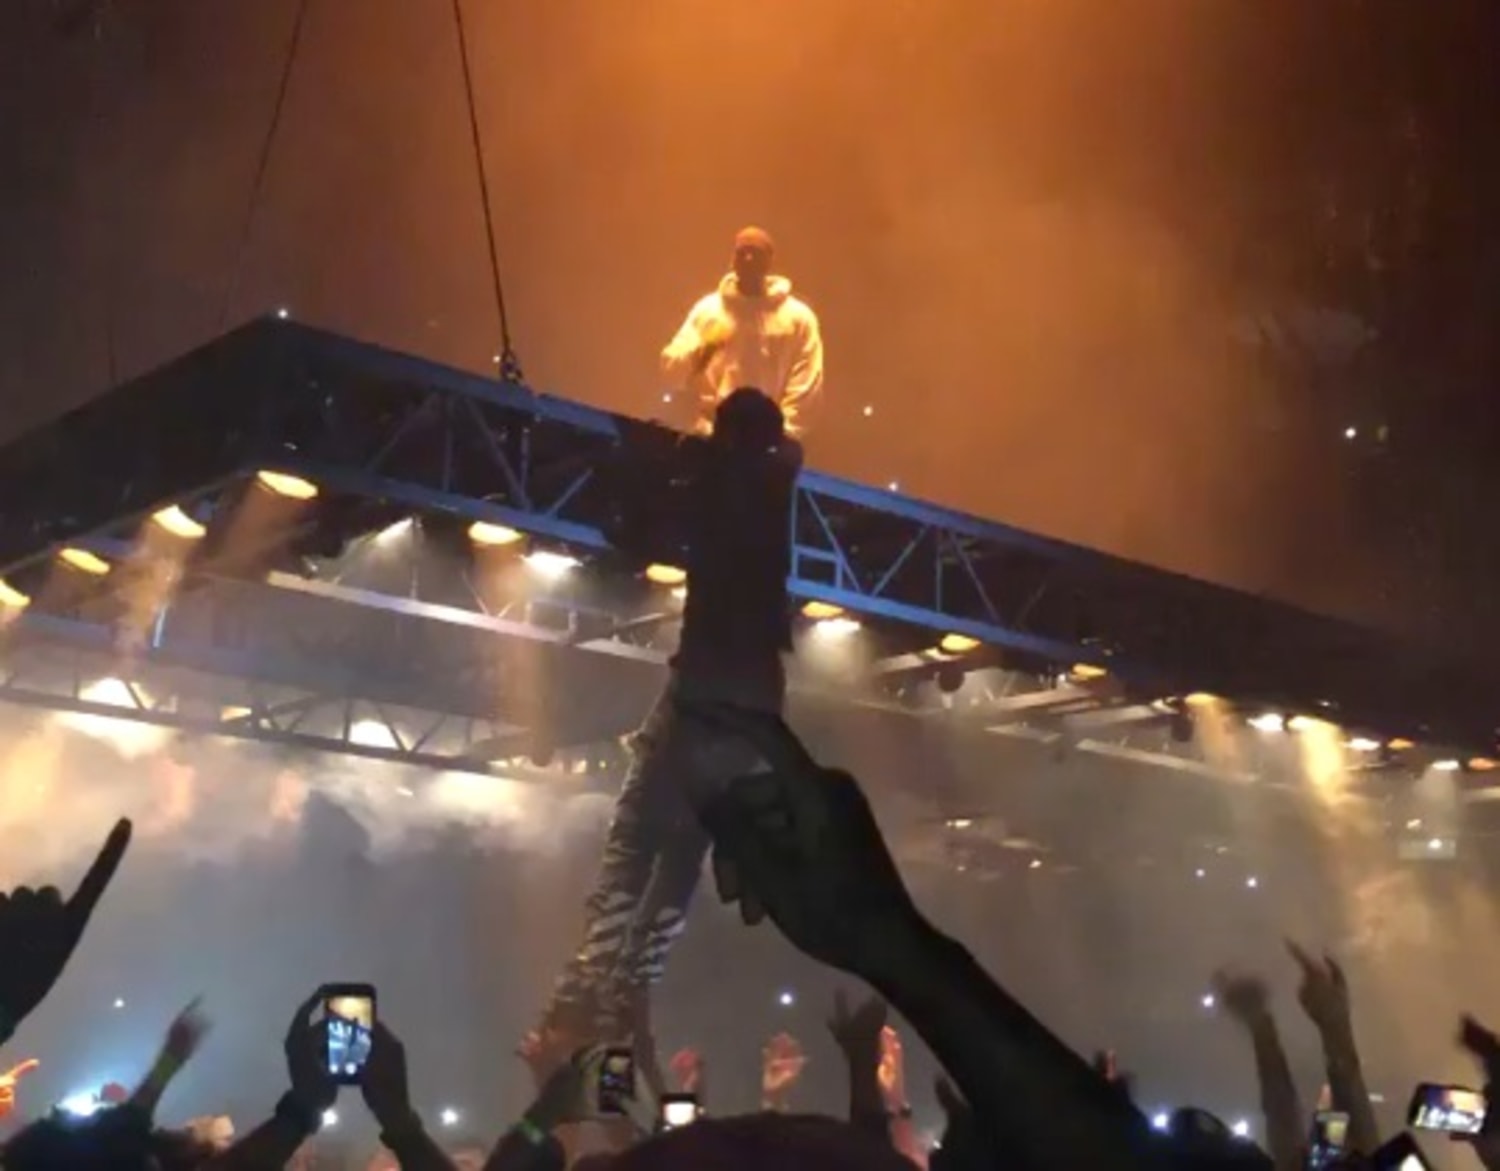 Man Tries to Board Kanye West's Stage at Concert